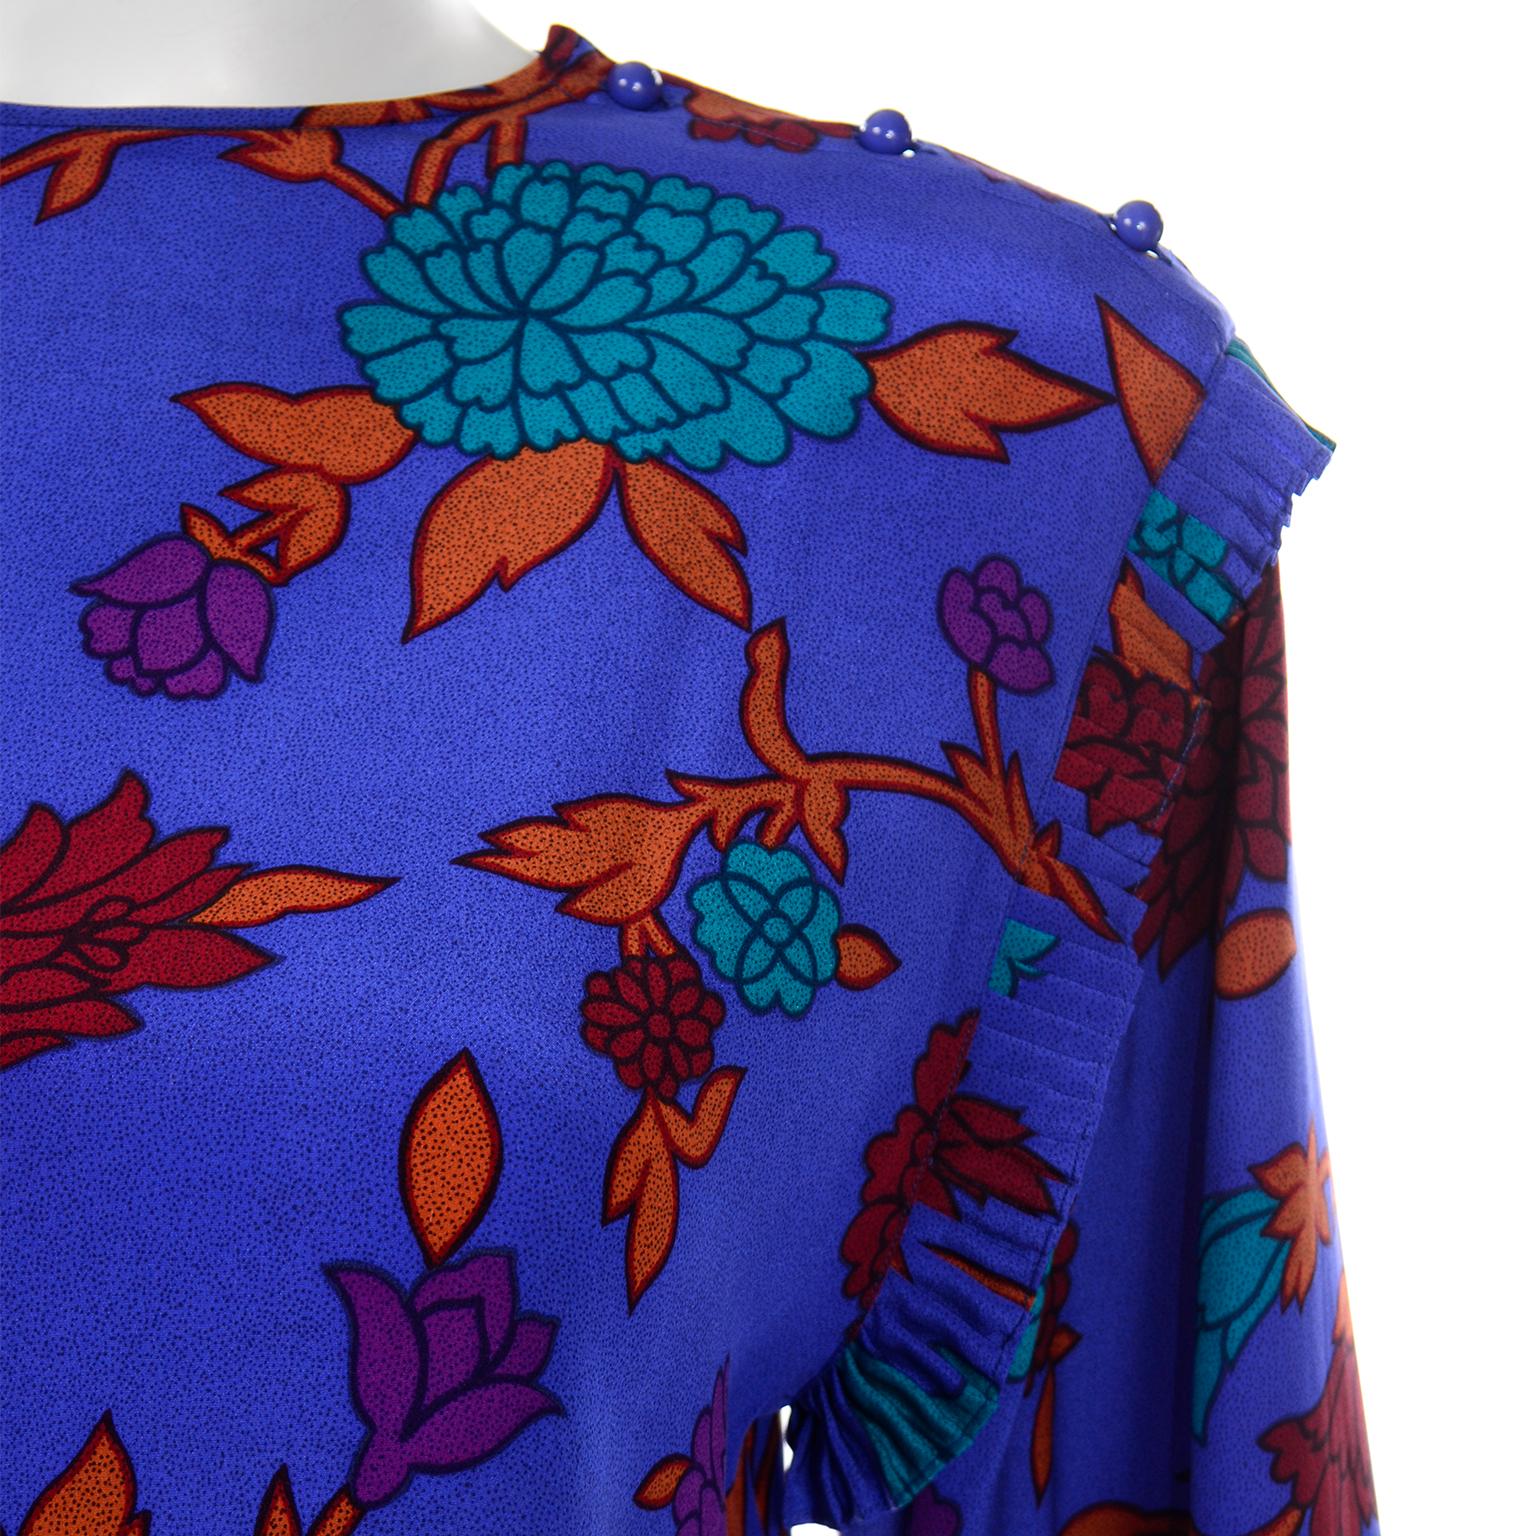 Vintage Albert Nipon Blue Orange & Red Silk Floral Print 2pc Dress In Excellent Condition For Sale In Portland, OR